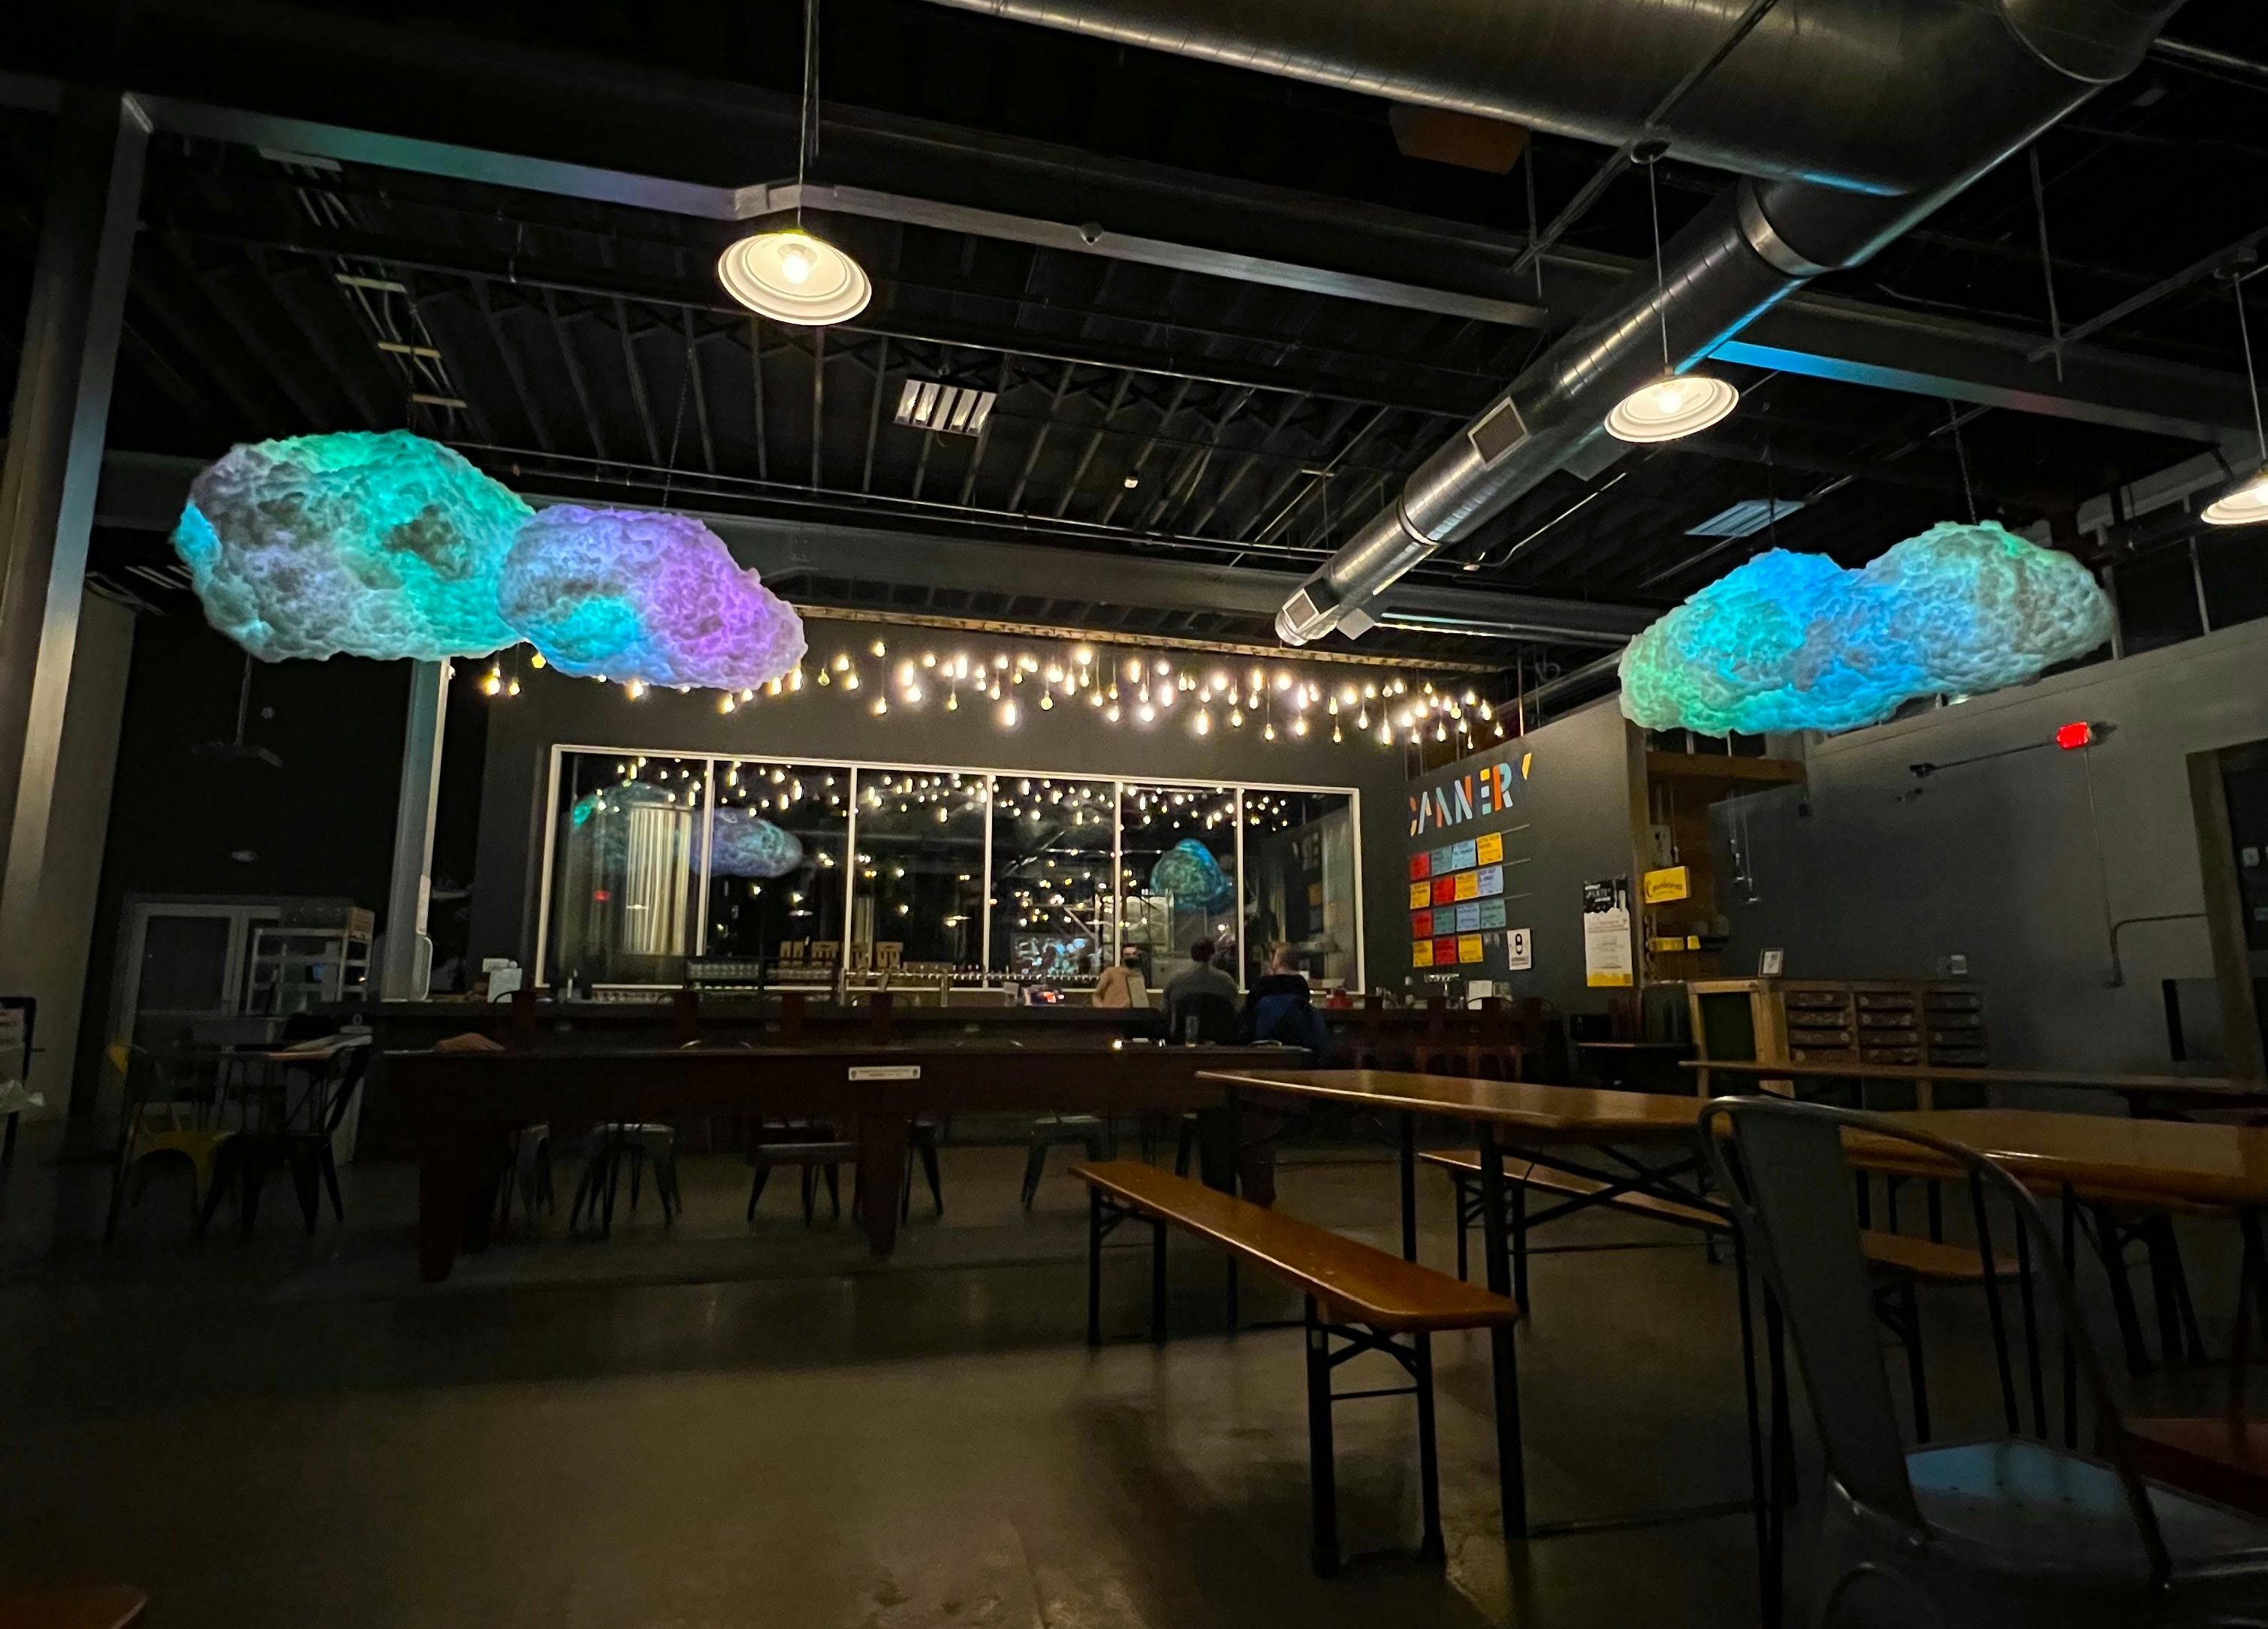 Final cloud placement in Aeronaut Brewery